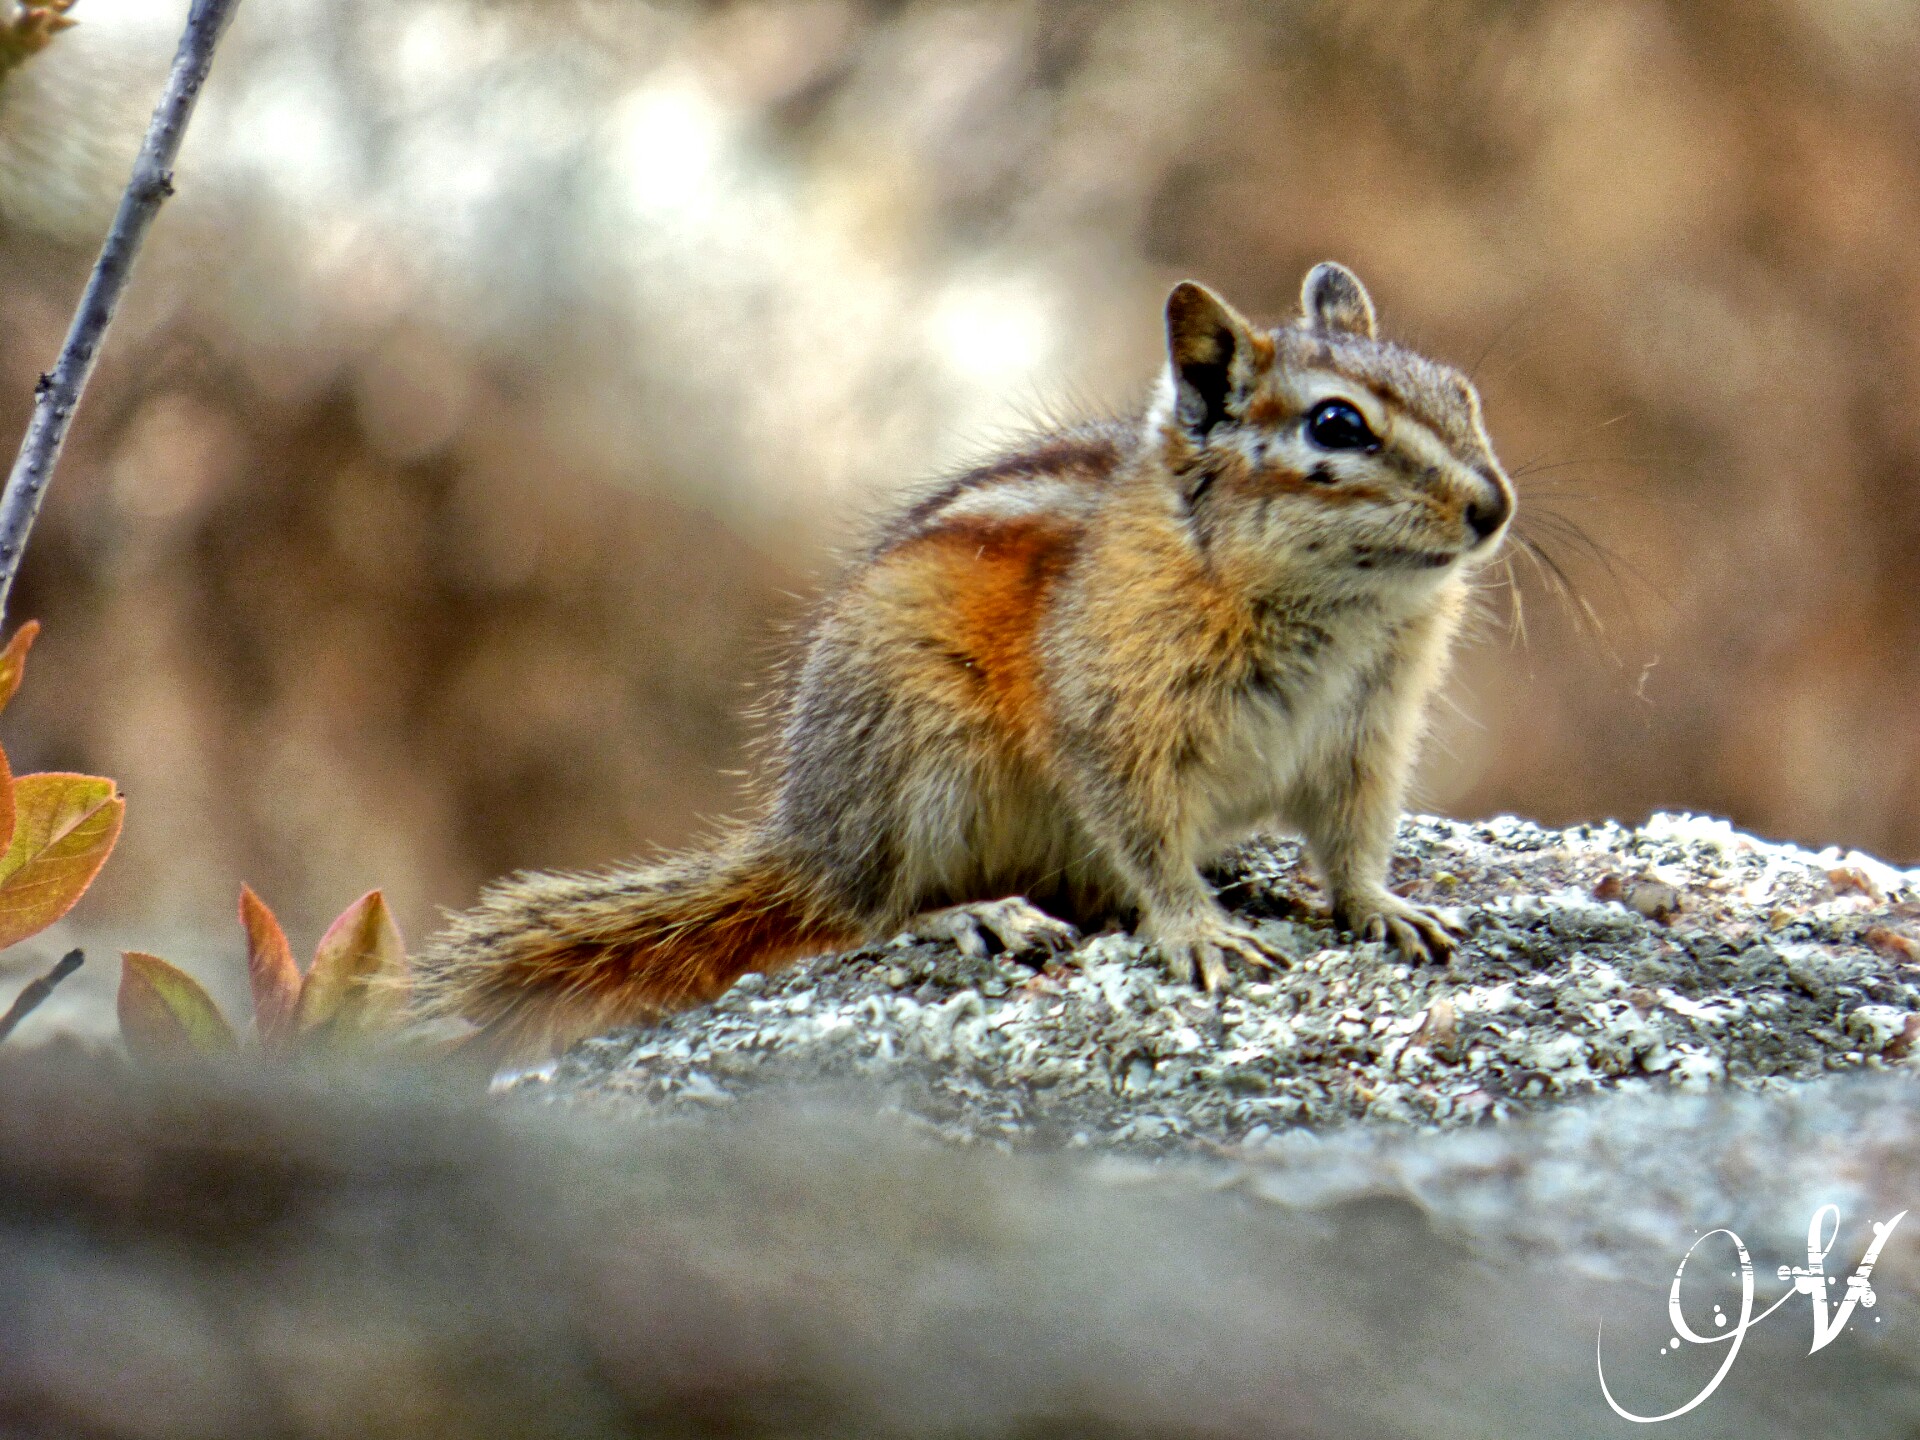 The Red Tailed Chipmunk heard me but couldn't see me....